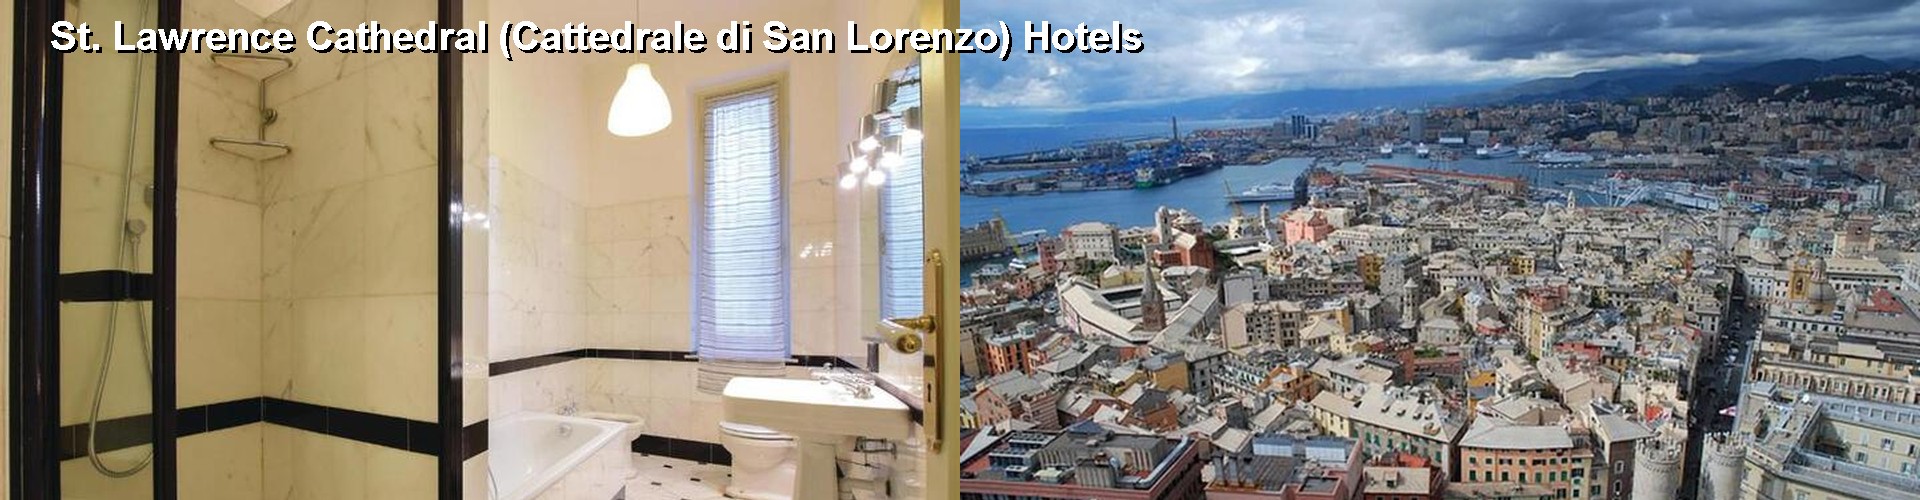 5 Best Hotels near St. Lawrence Cathedral (Cattedrale di San Lorenzo)